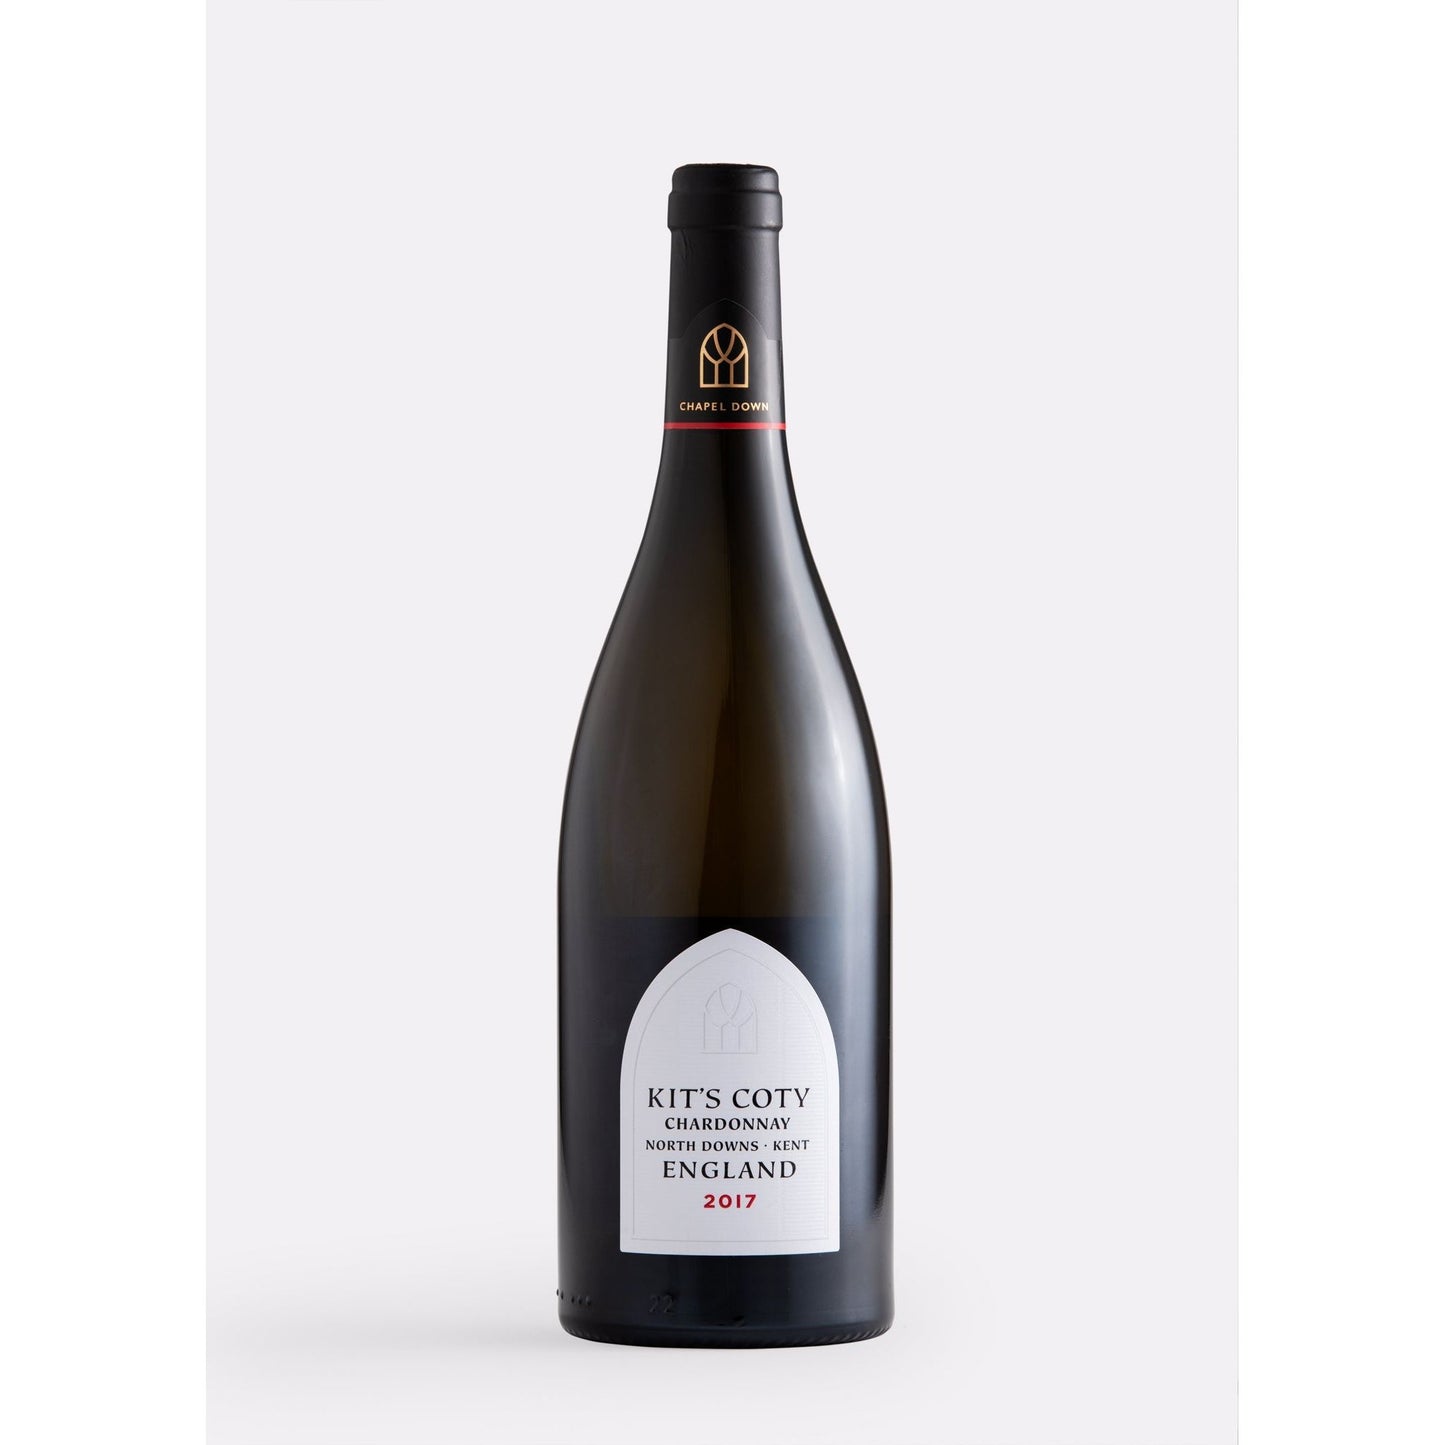 Chapel Down Kits Coty Chardonnay thee english wine collection